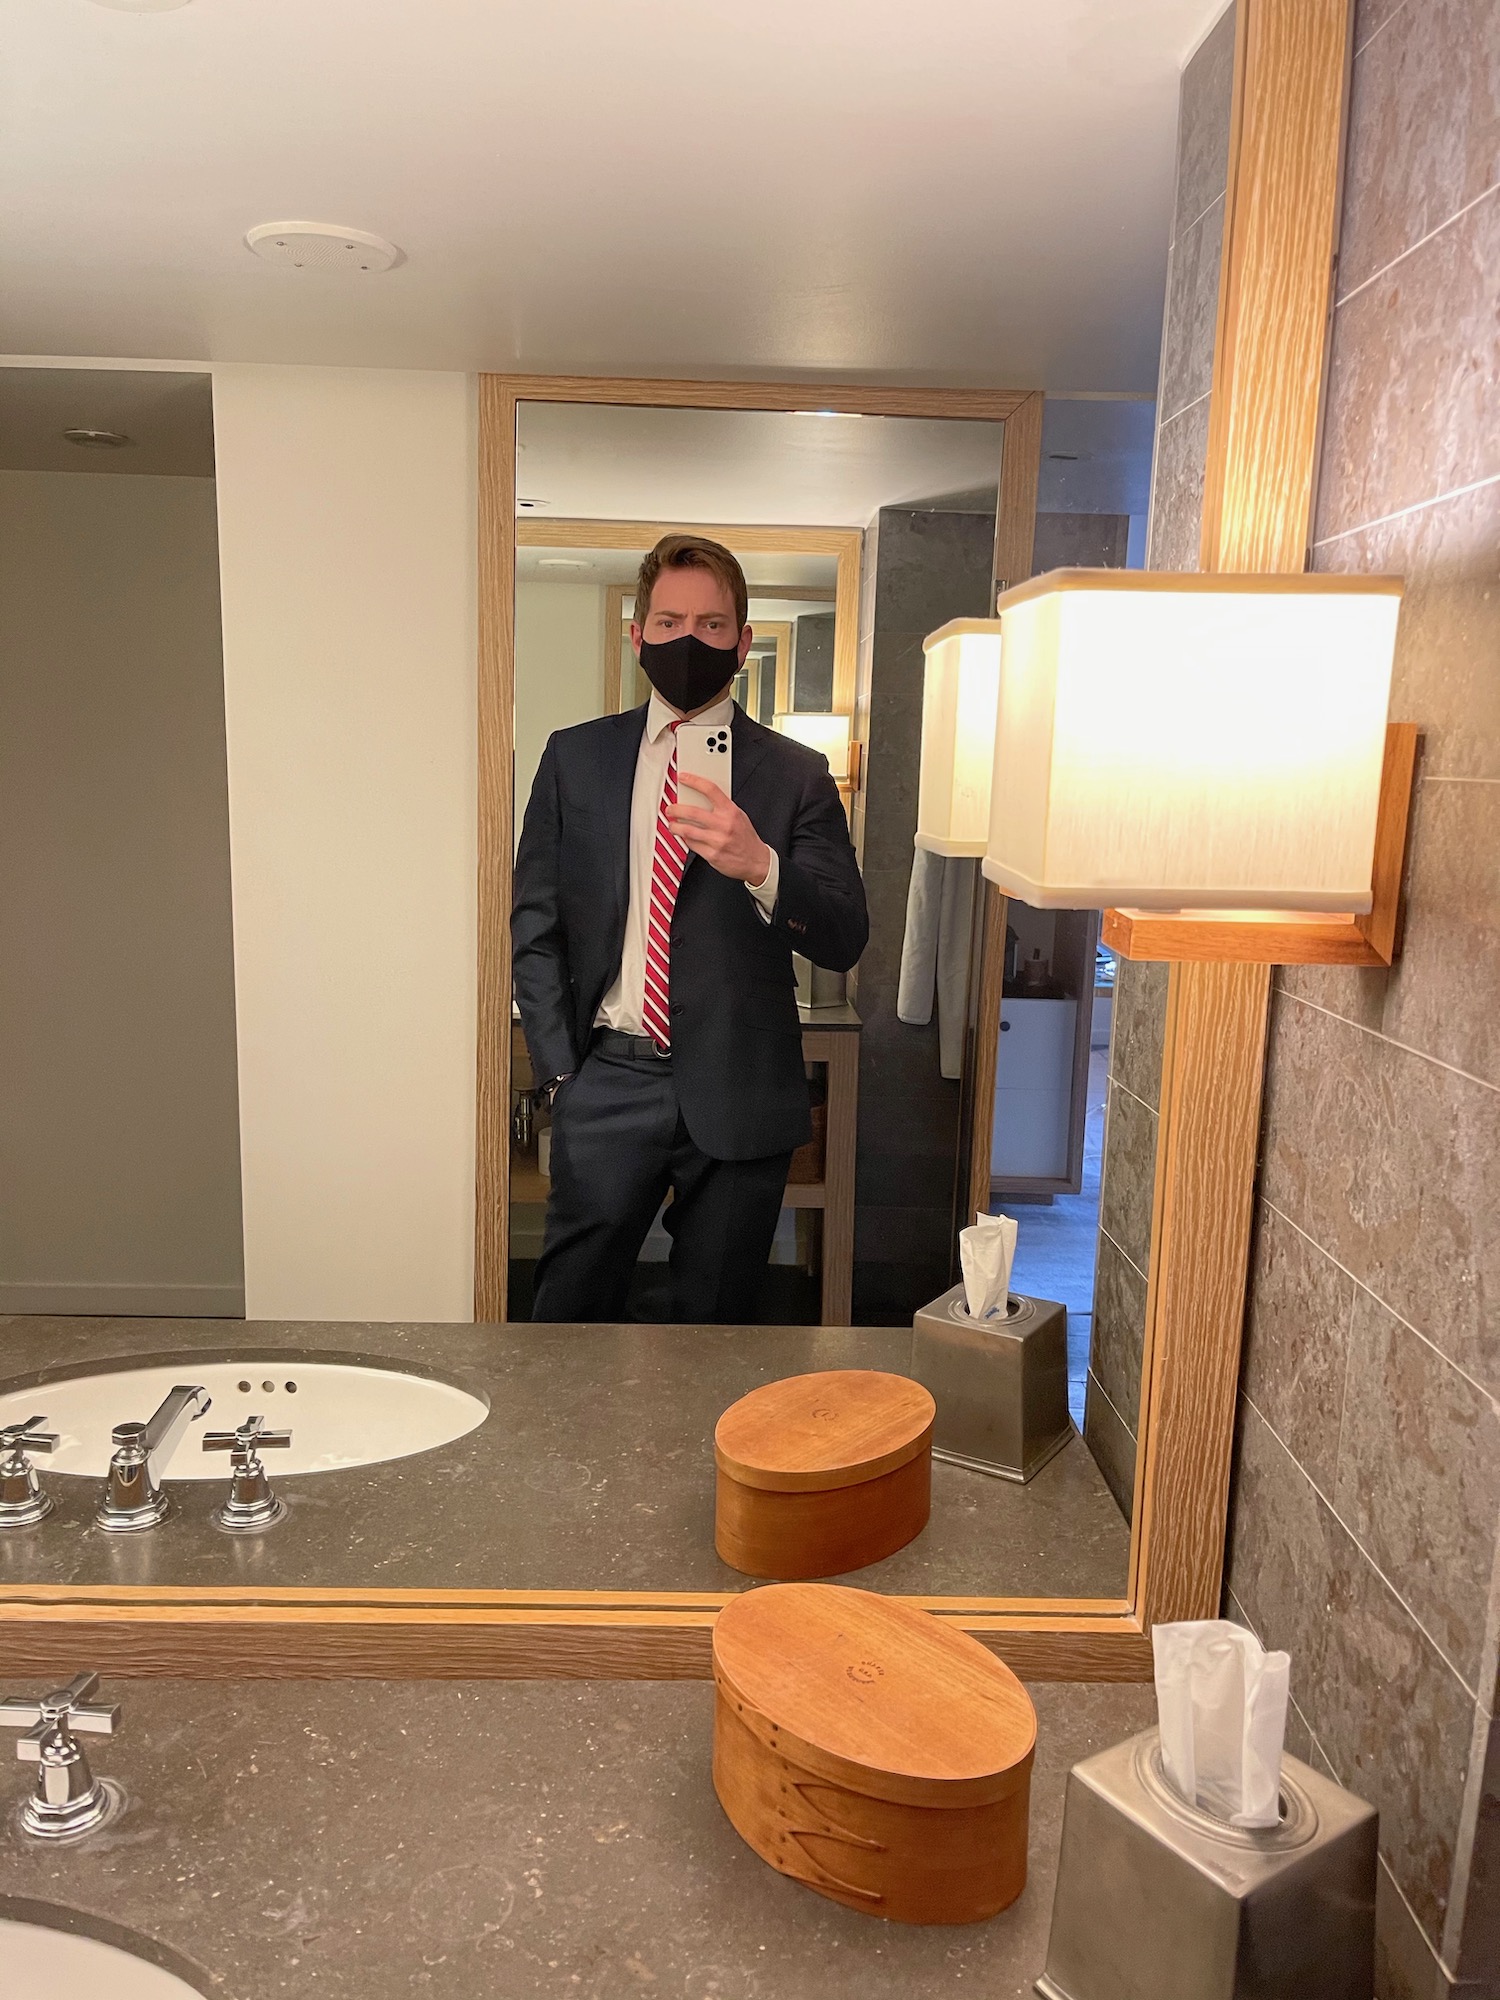 a man in a suit and tie taking a selfie in a bathroom mirror